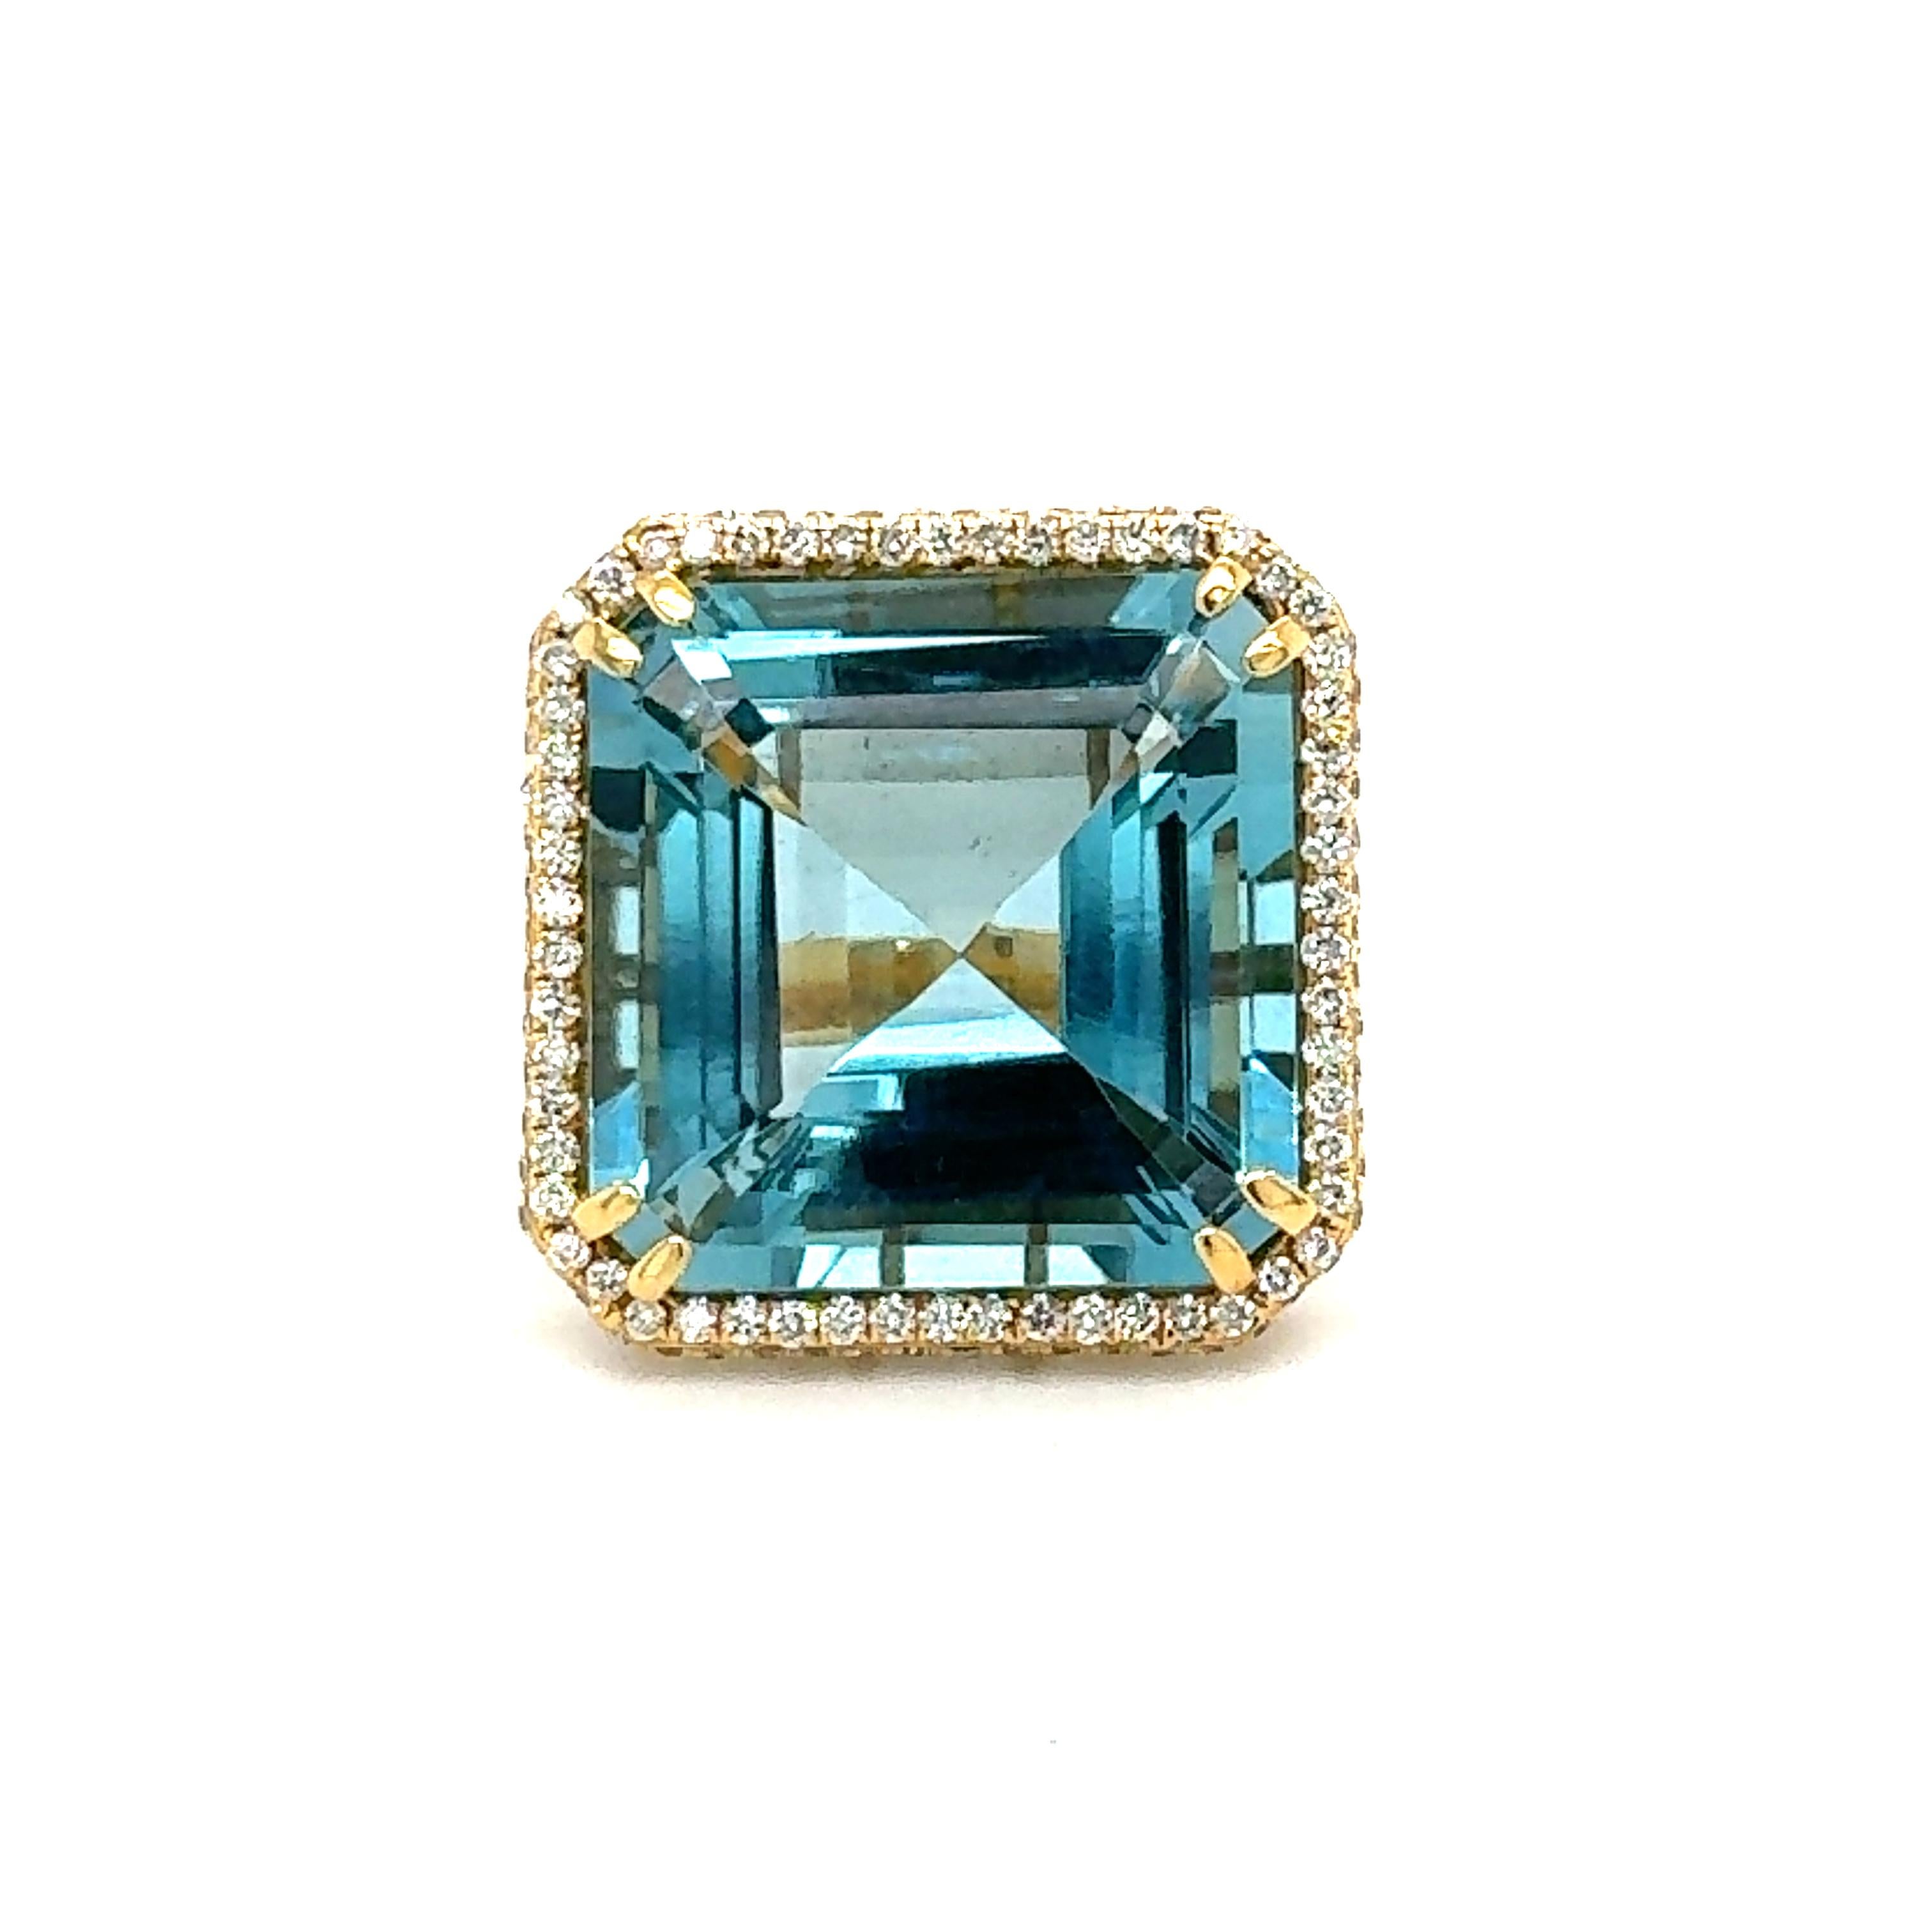 A natural 36.14-carat blue topaz surrounded by 1.99-carat diamonds solid ring set in 18-Kt yellow gold.  